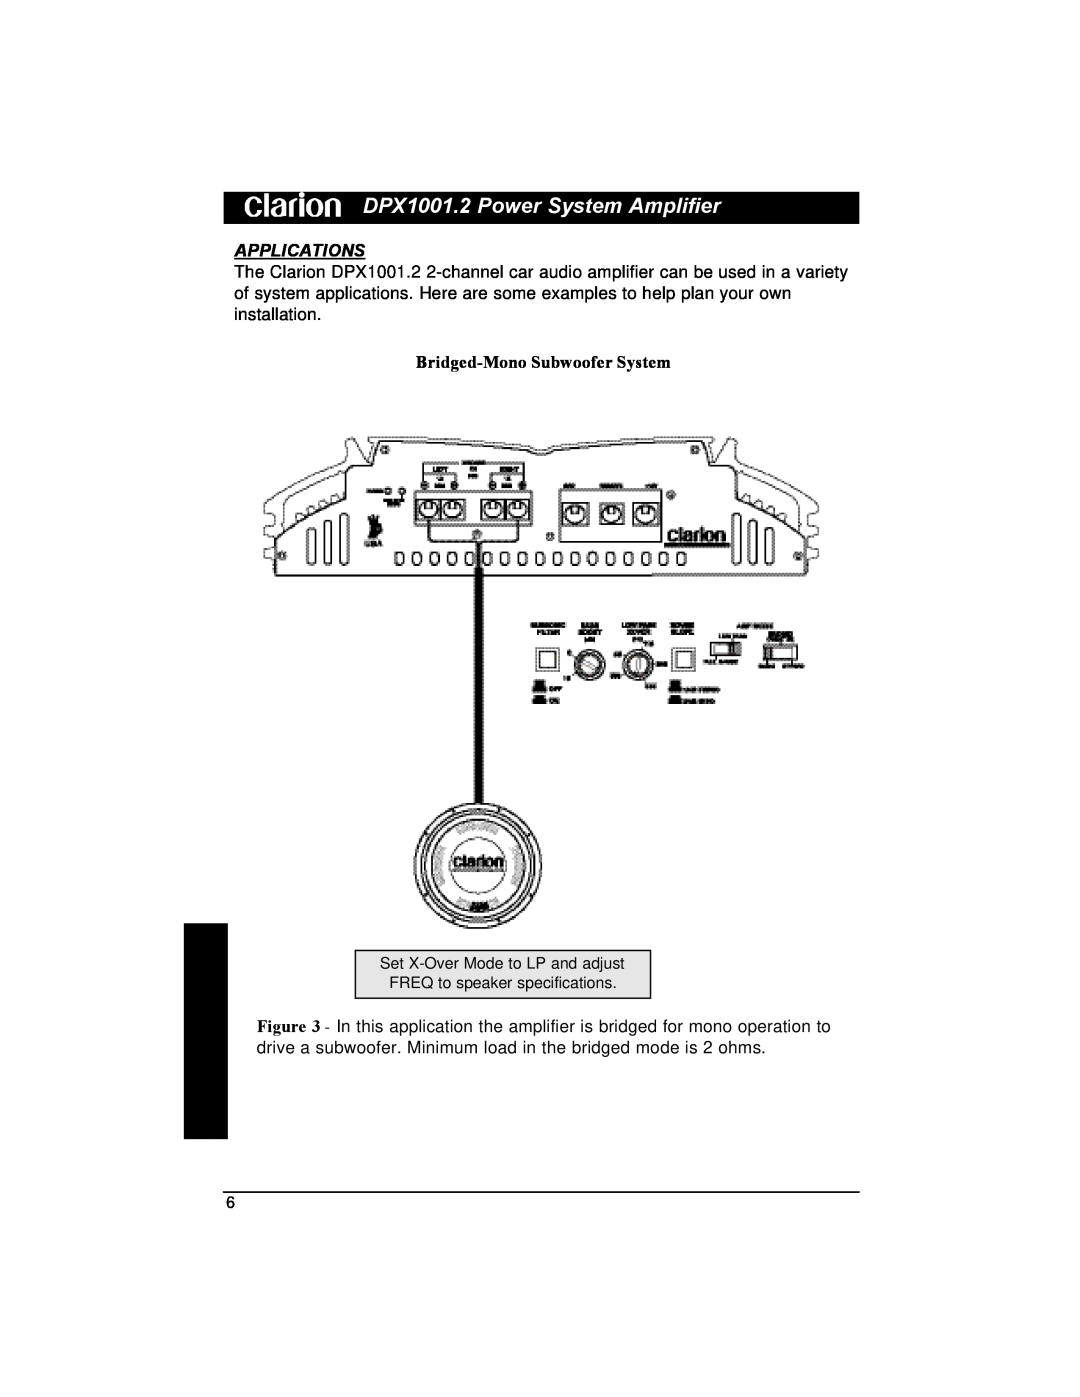 Clarion installation manual Applications, Bridged-MonoSubwoofer System, DPX1001.2 Power System Amplifier 